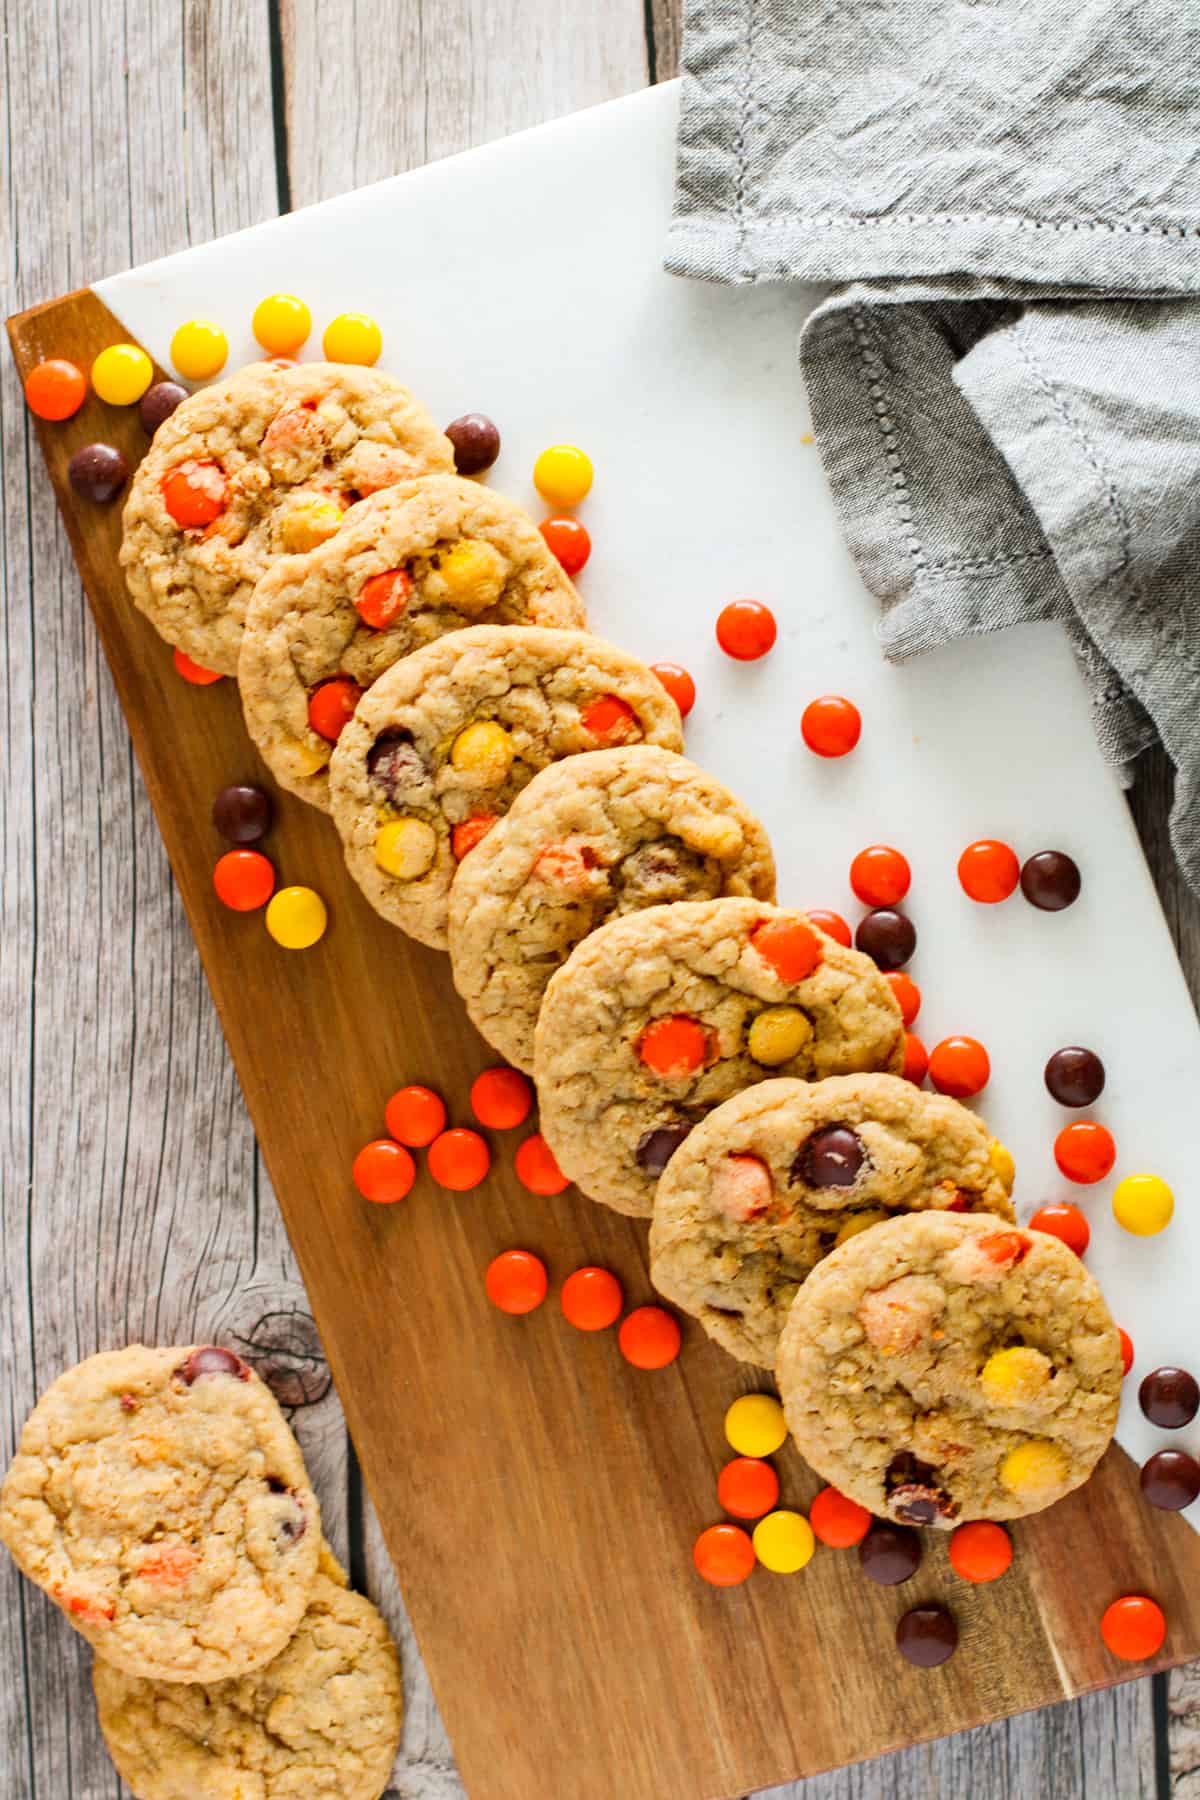 Cookies lined up on a cutting board with Reese's pieces candy.